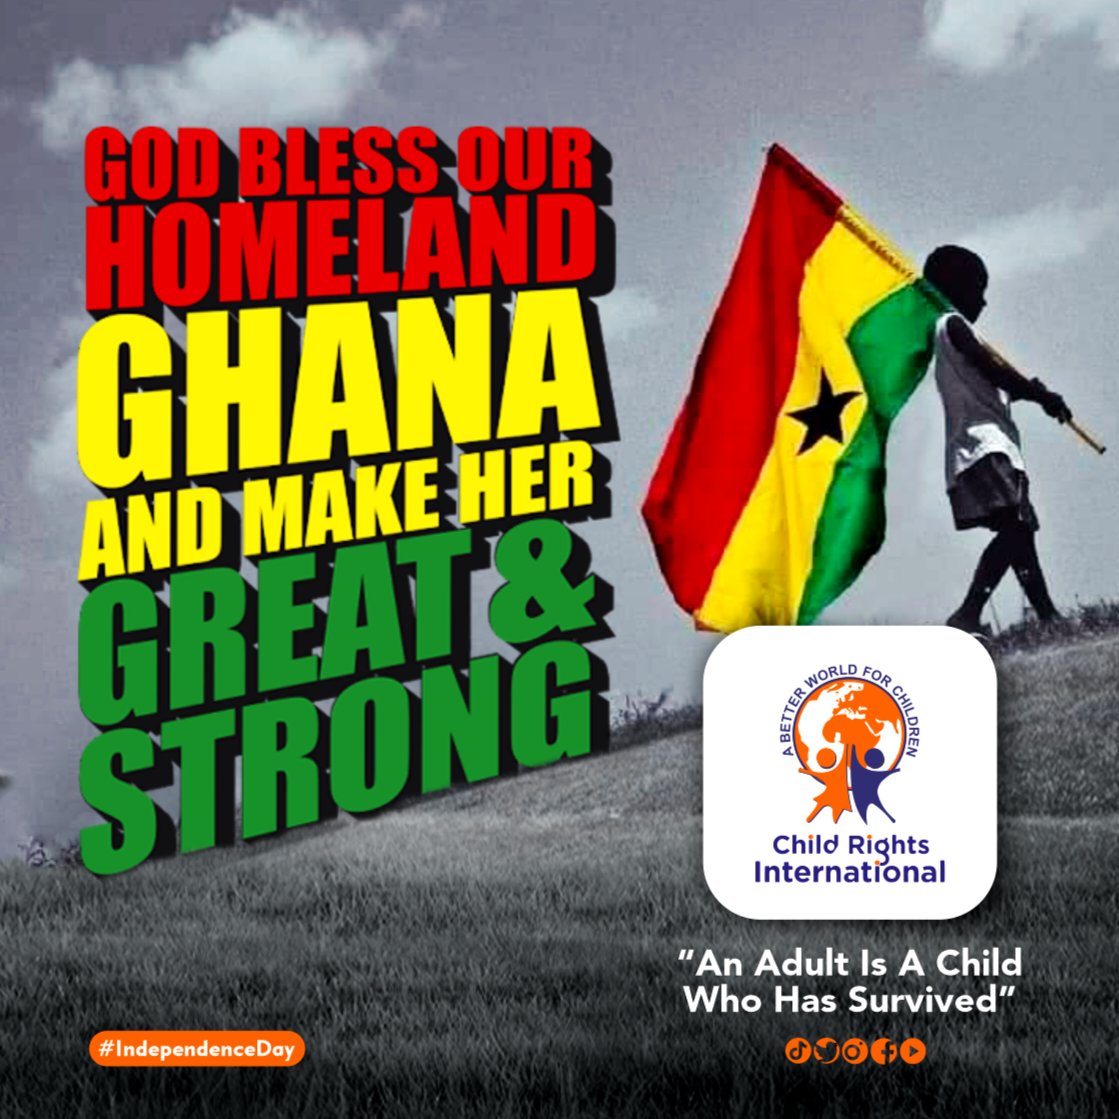 GOD BLESS OUR HOMELAND #GHANA AND MAKE HER GREAT AND STRONG!

#HappyIndependenceDay2023
#Children
#crighana
#GhanaMonth 
#GhanaAt66
#AnAdultIsAChildWhoHasSurvived